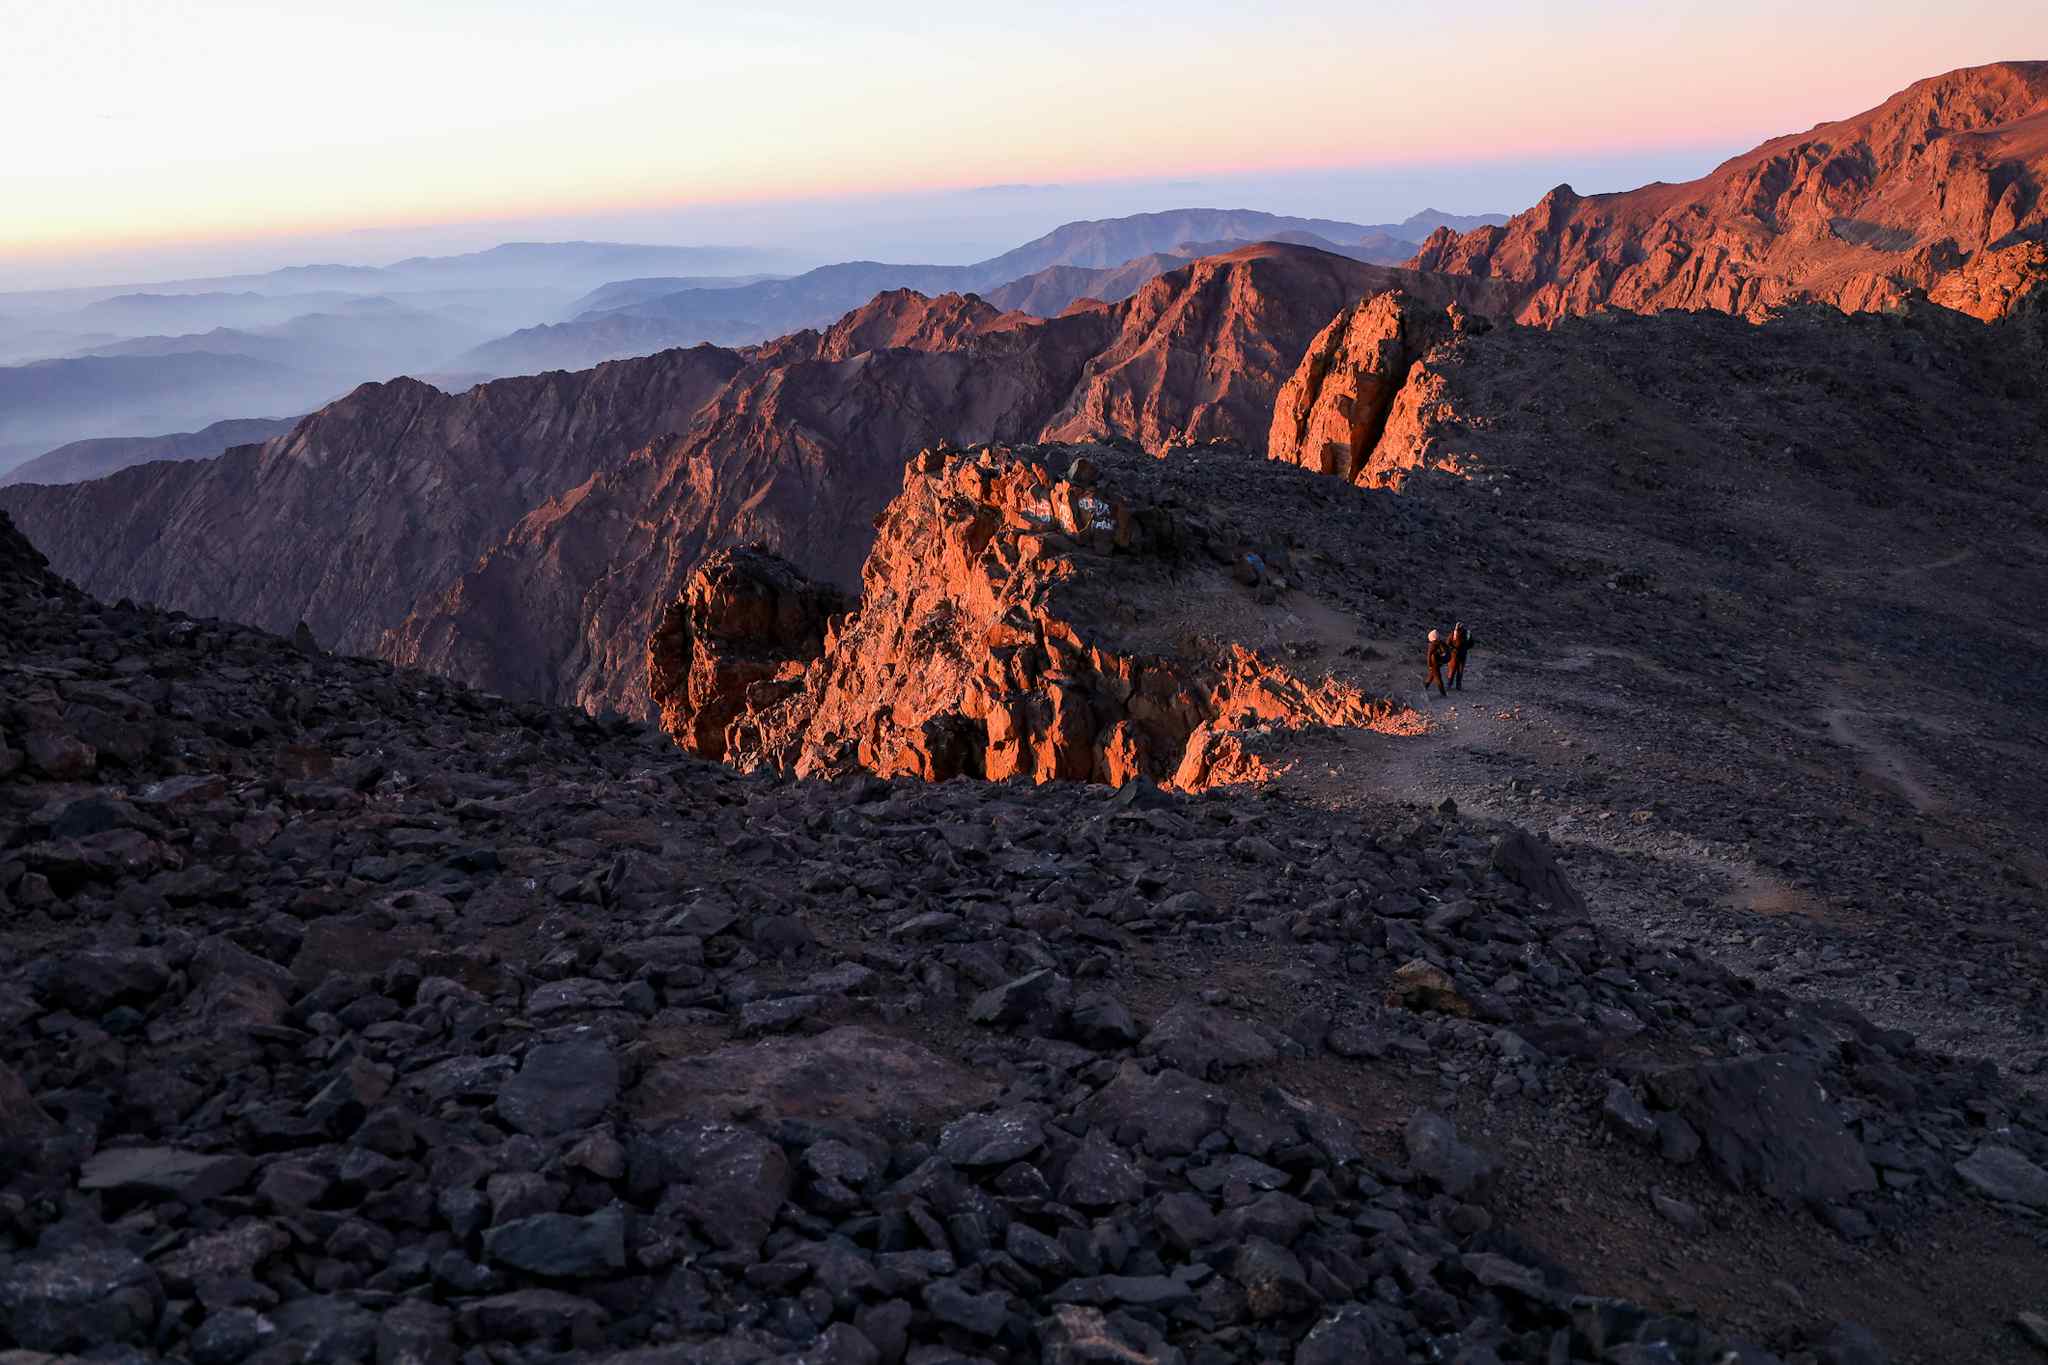 Sunrise at the summit of Mountain Toubkal in the Atlas Mountains, Morocco. 